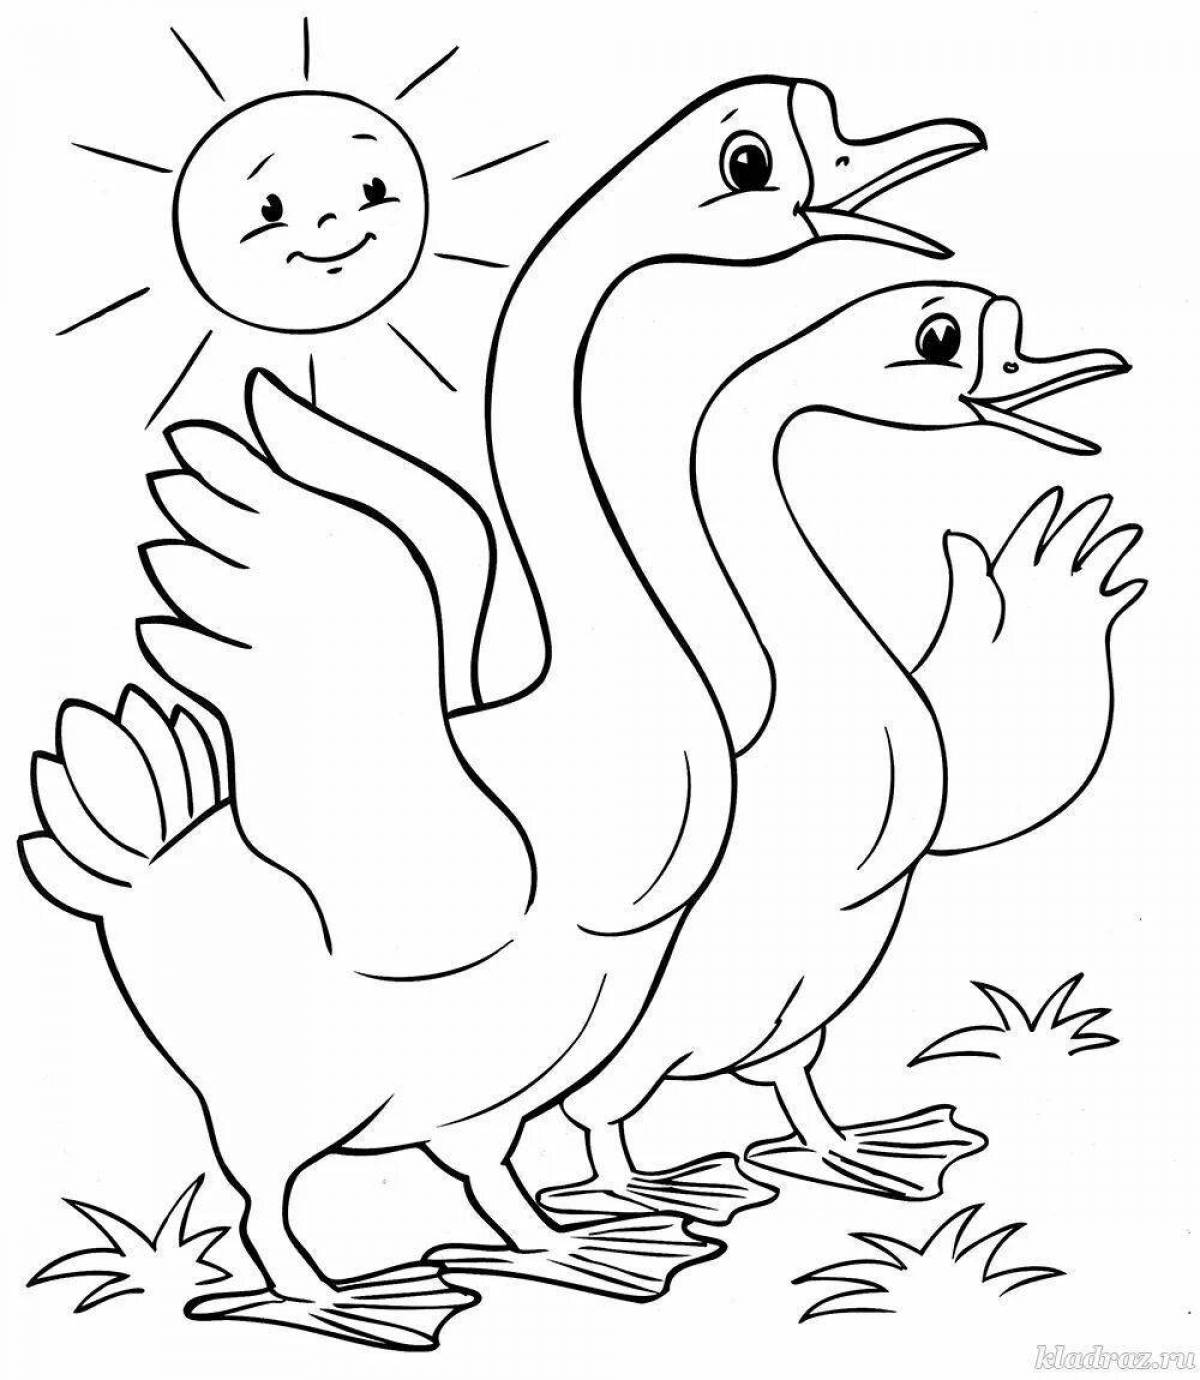 Incredible goose coloring book for 3-4 year olds